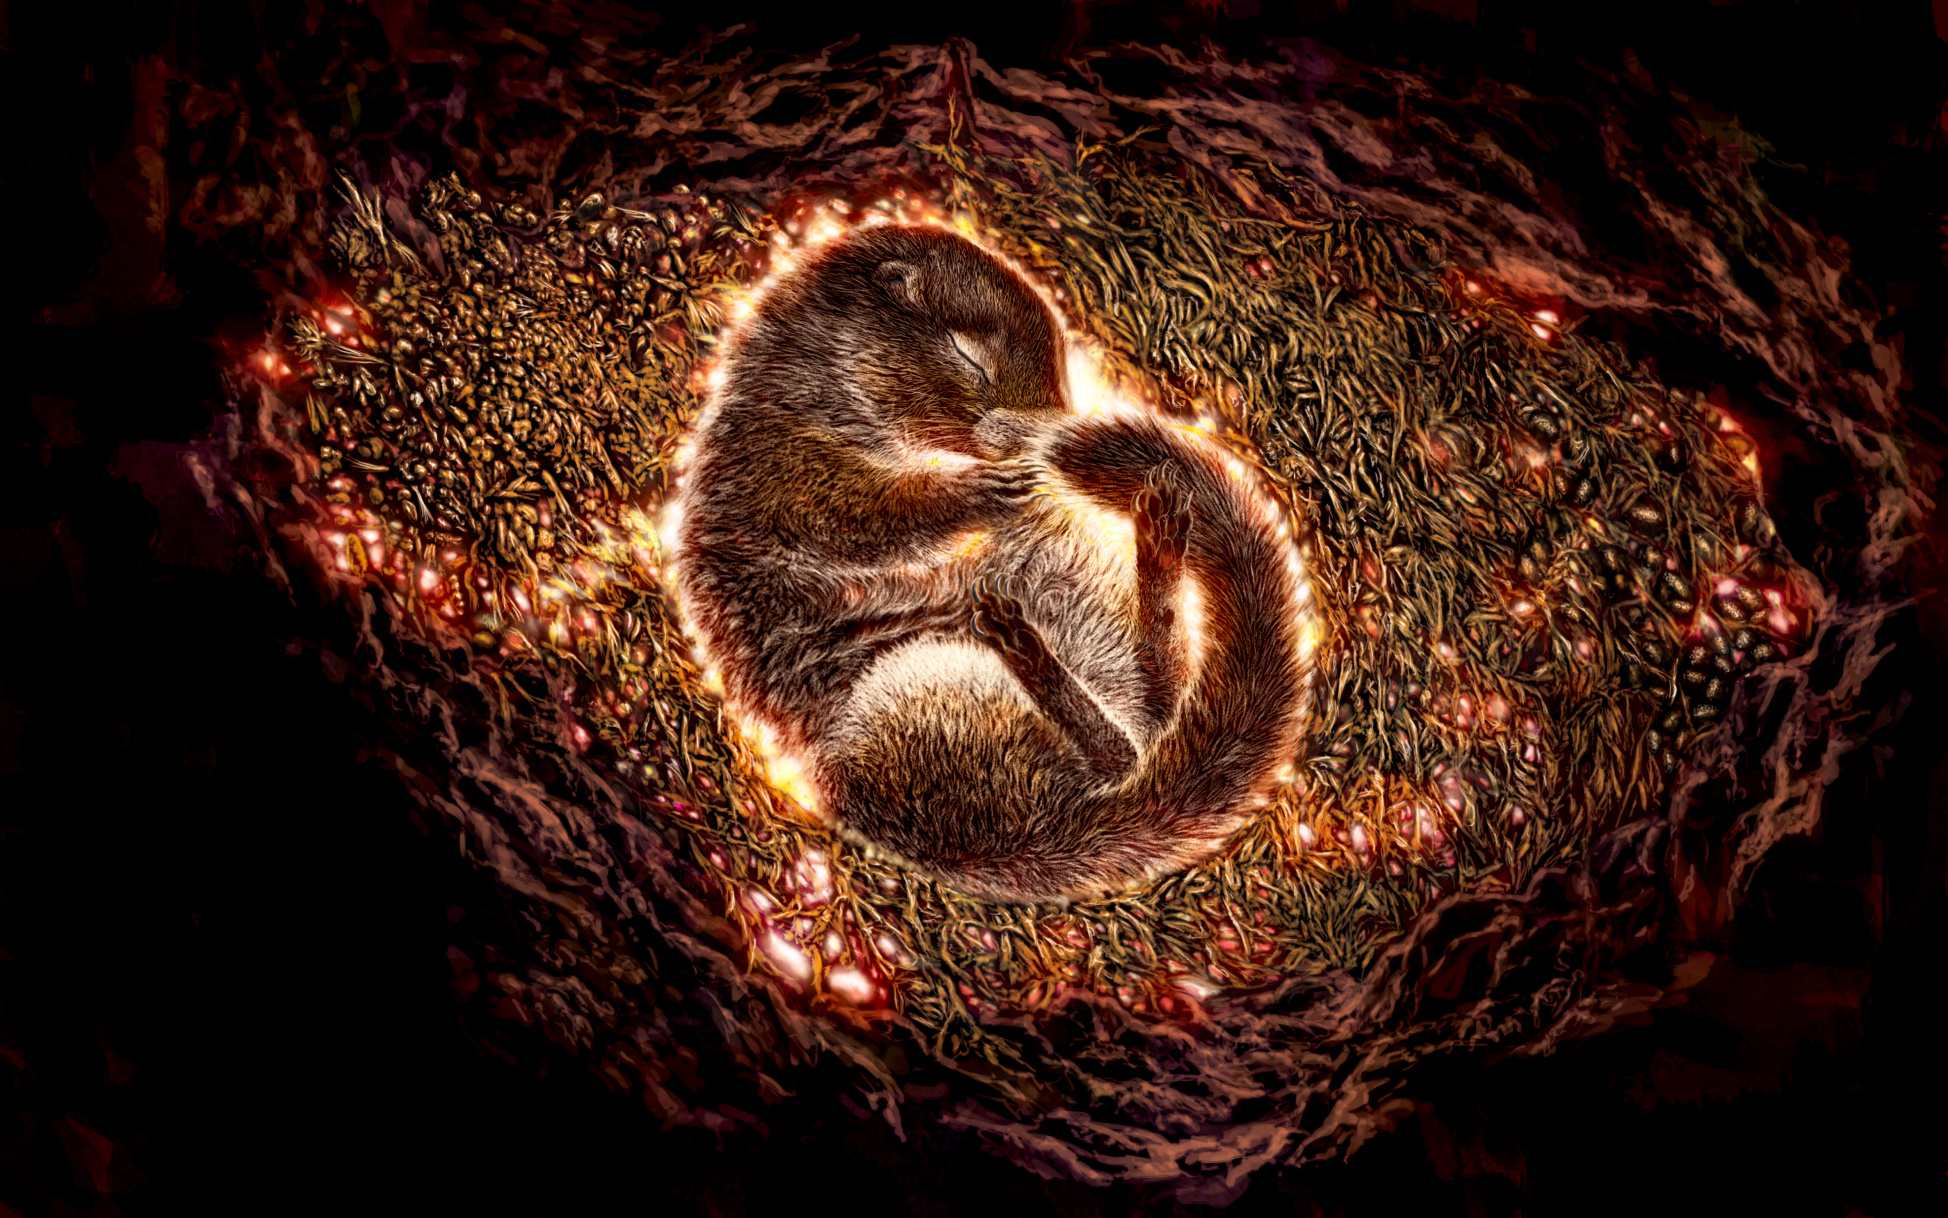 An illustration of the mummified ground squirrel curled up in its burrow during hibernation.